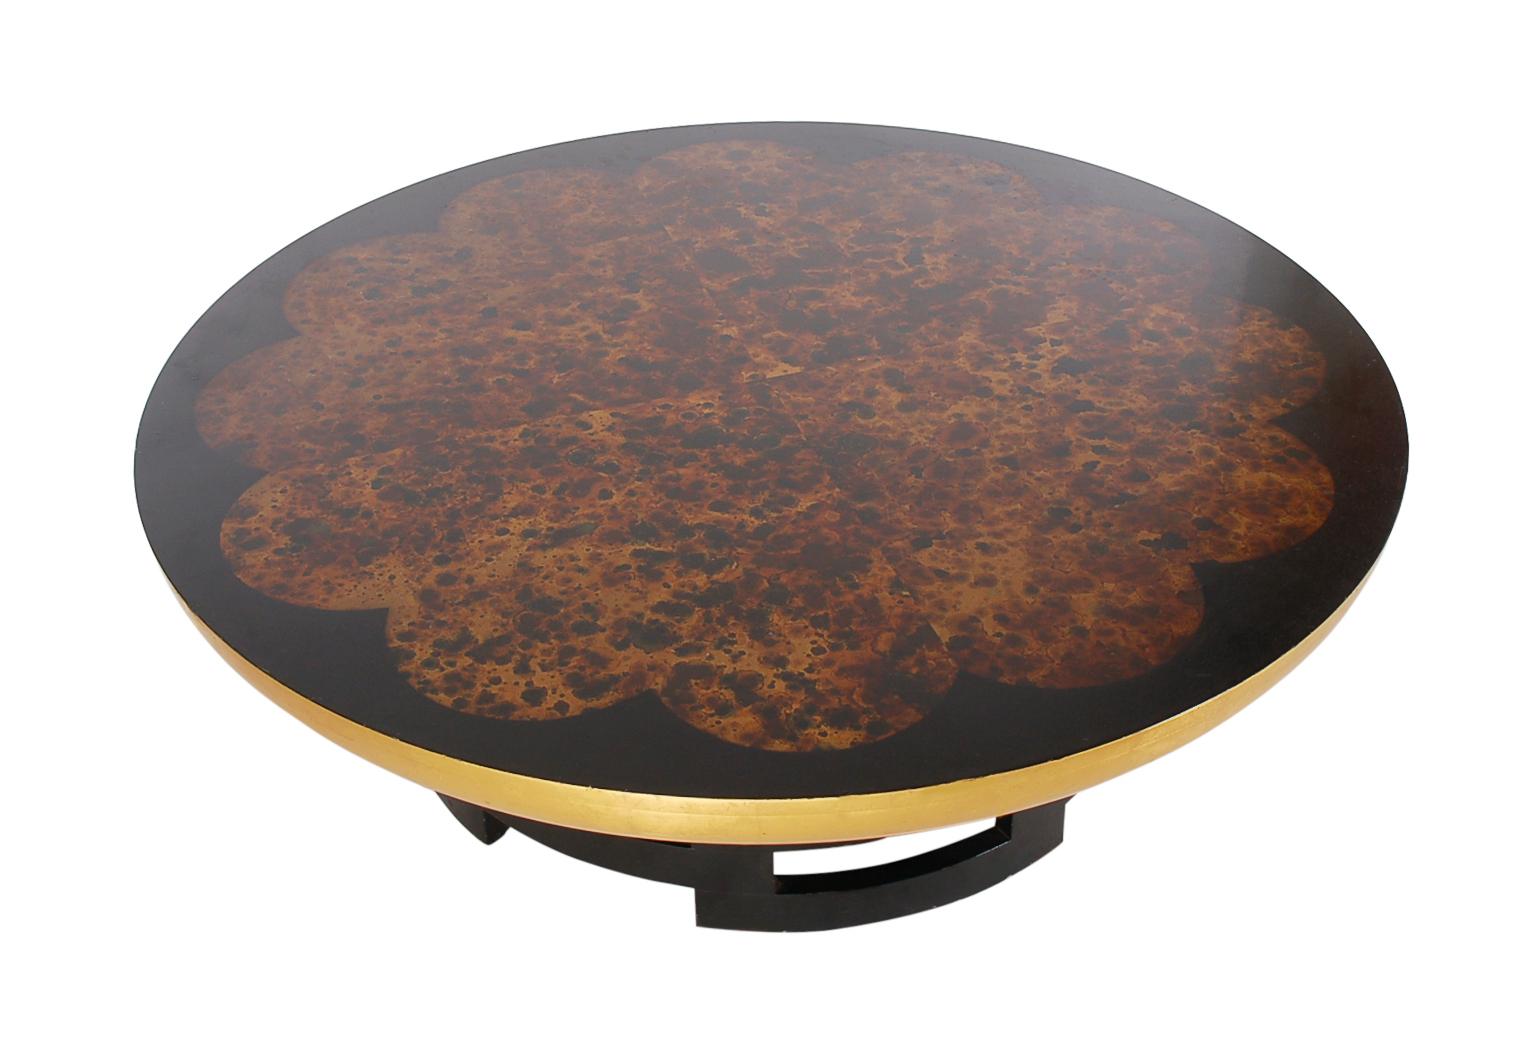 A beautiful and substantial piece designed by Muller and Barringer for Kittinger. It consists of solid wood construction, black base, with faux tortoiseshell top. Very rich and sophisticated looking.